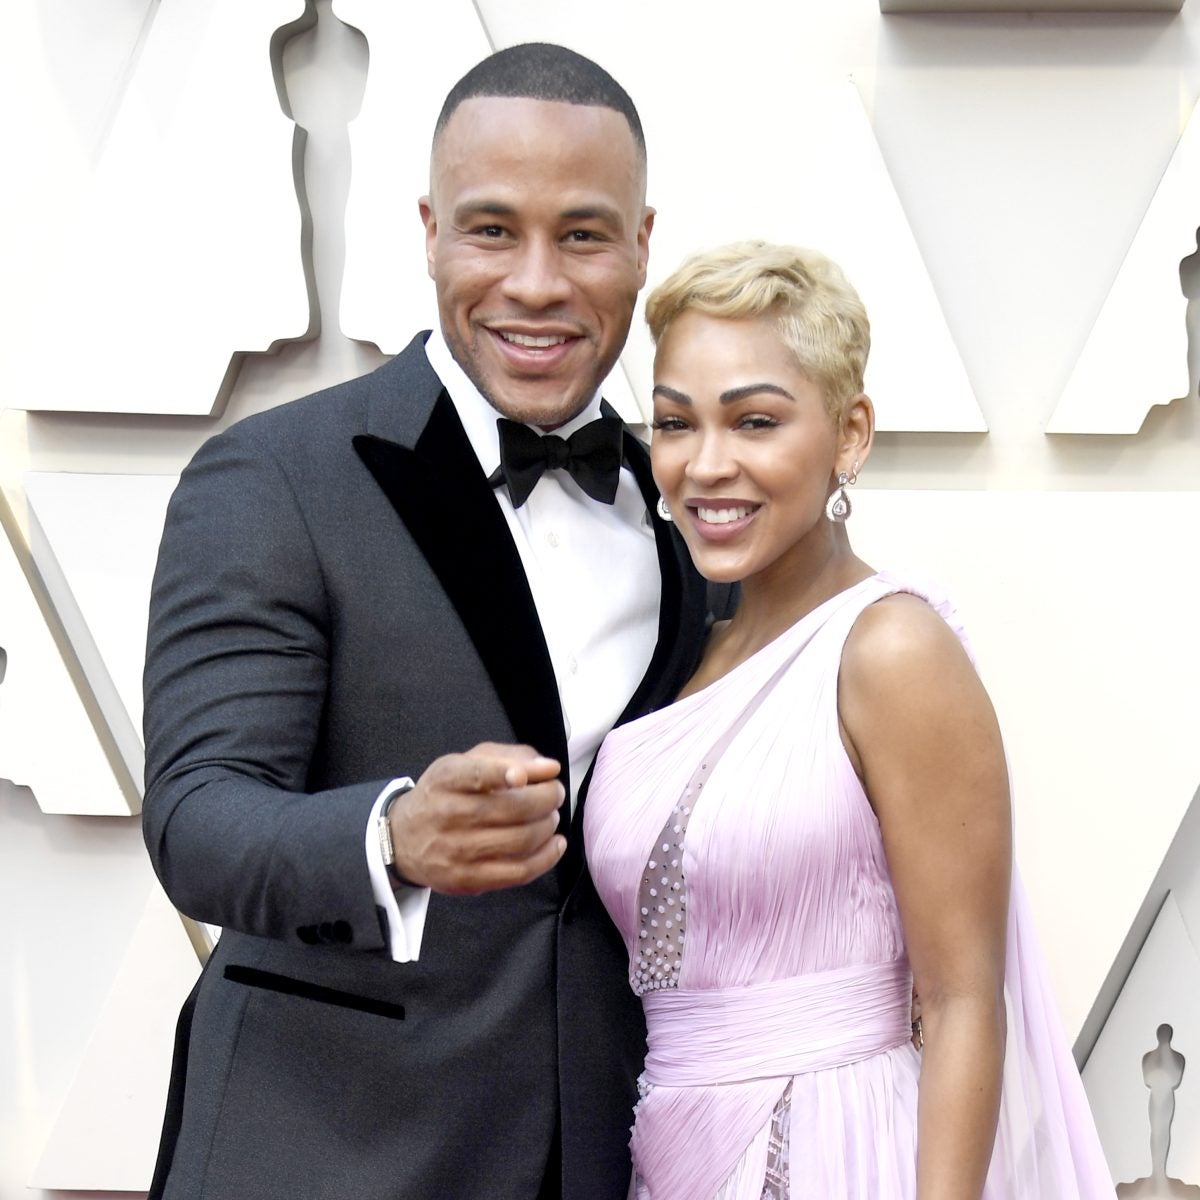 Meagan Good And DeVon Franklin Split After 9 Years Of Marriage: A Timeline Of Their Relationship